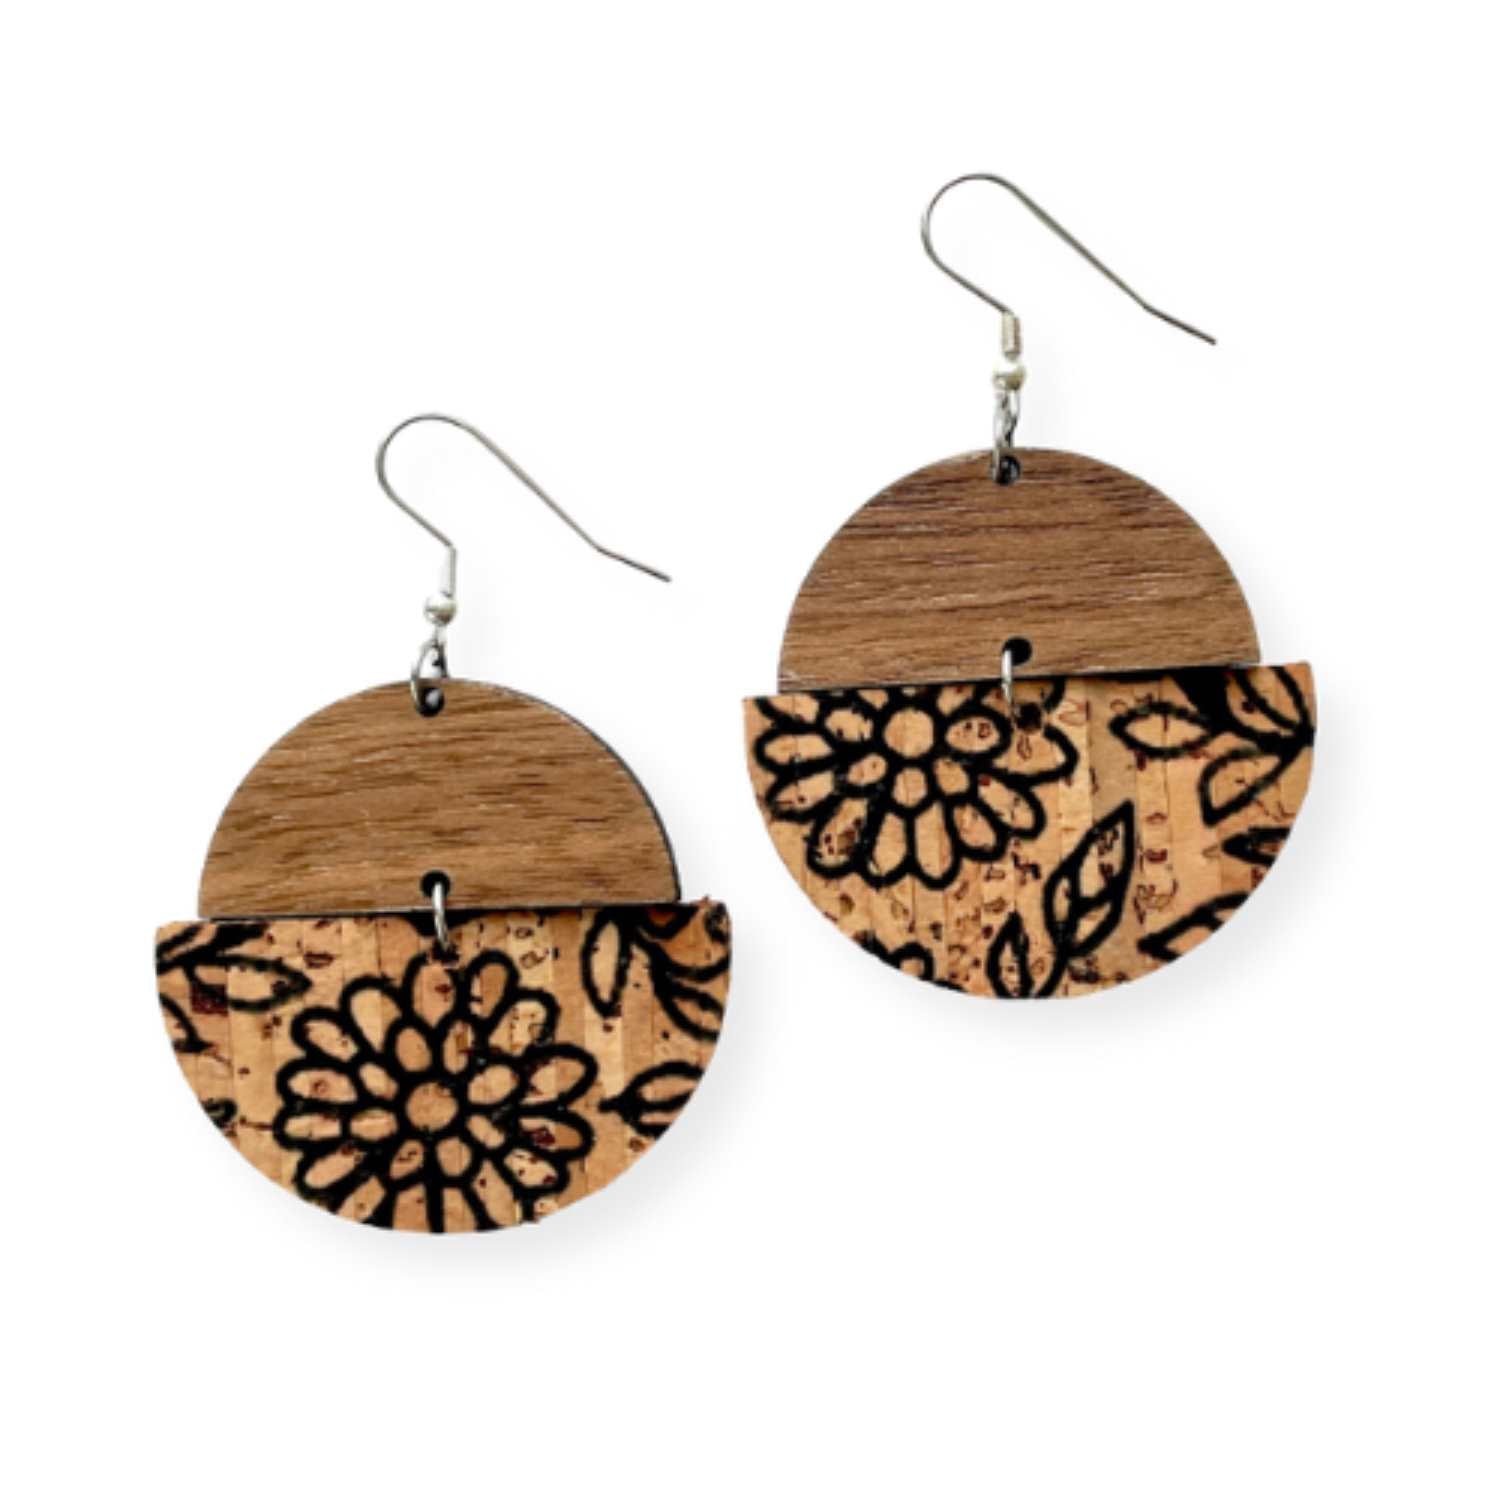 Everly Cork and Wood Handcrafted Round Earrings-Black Floral